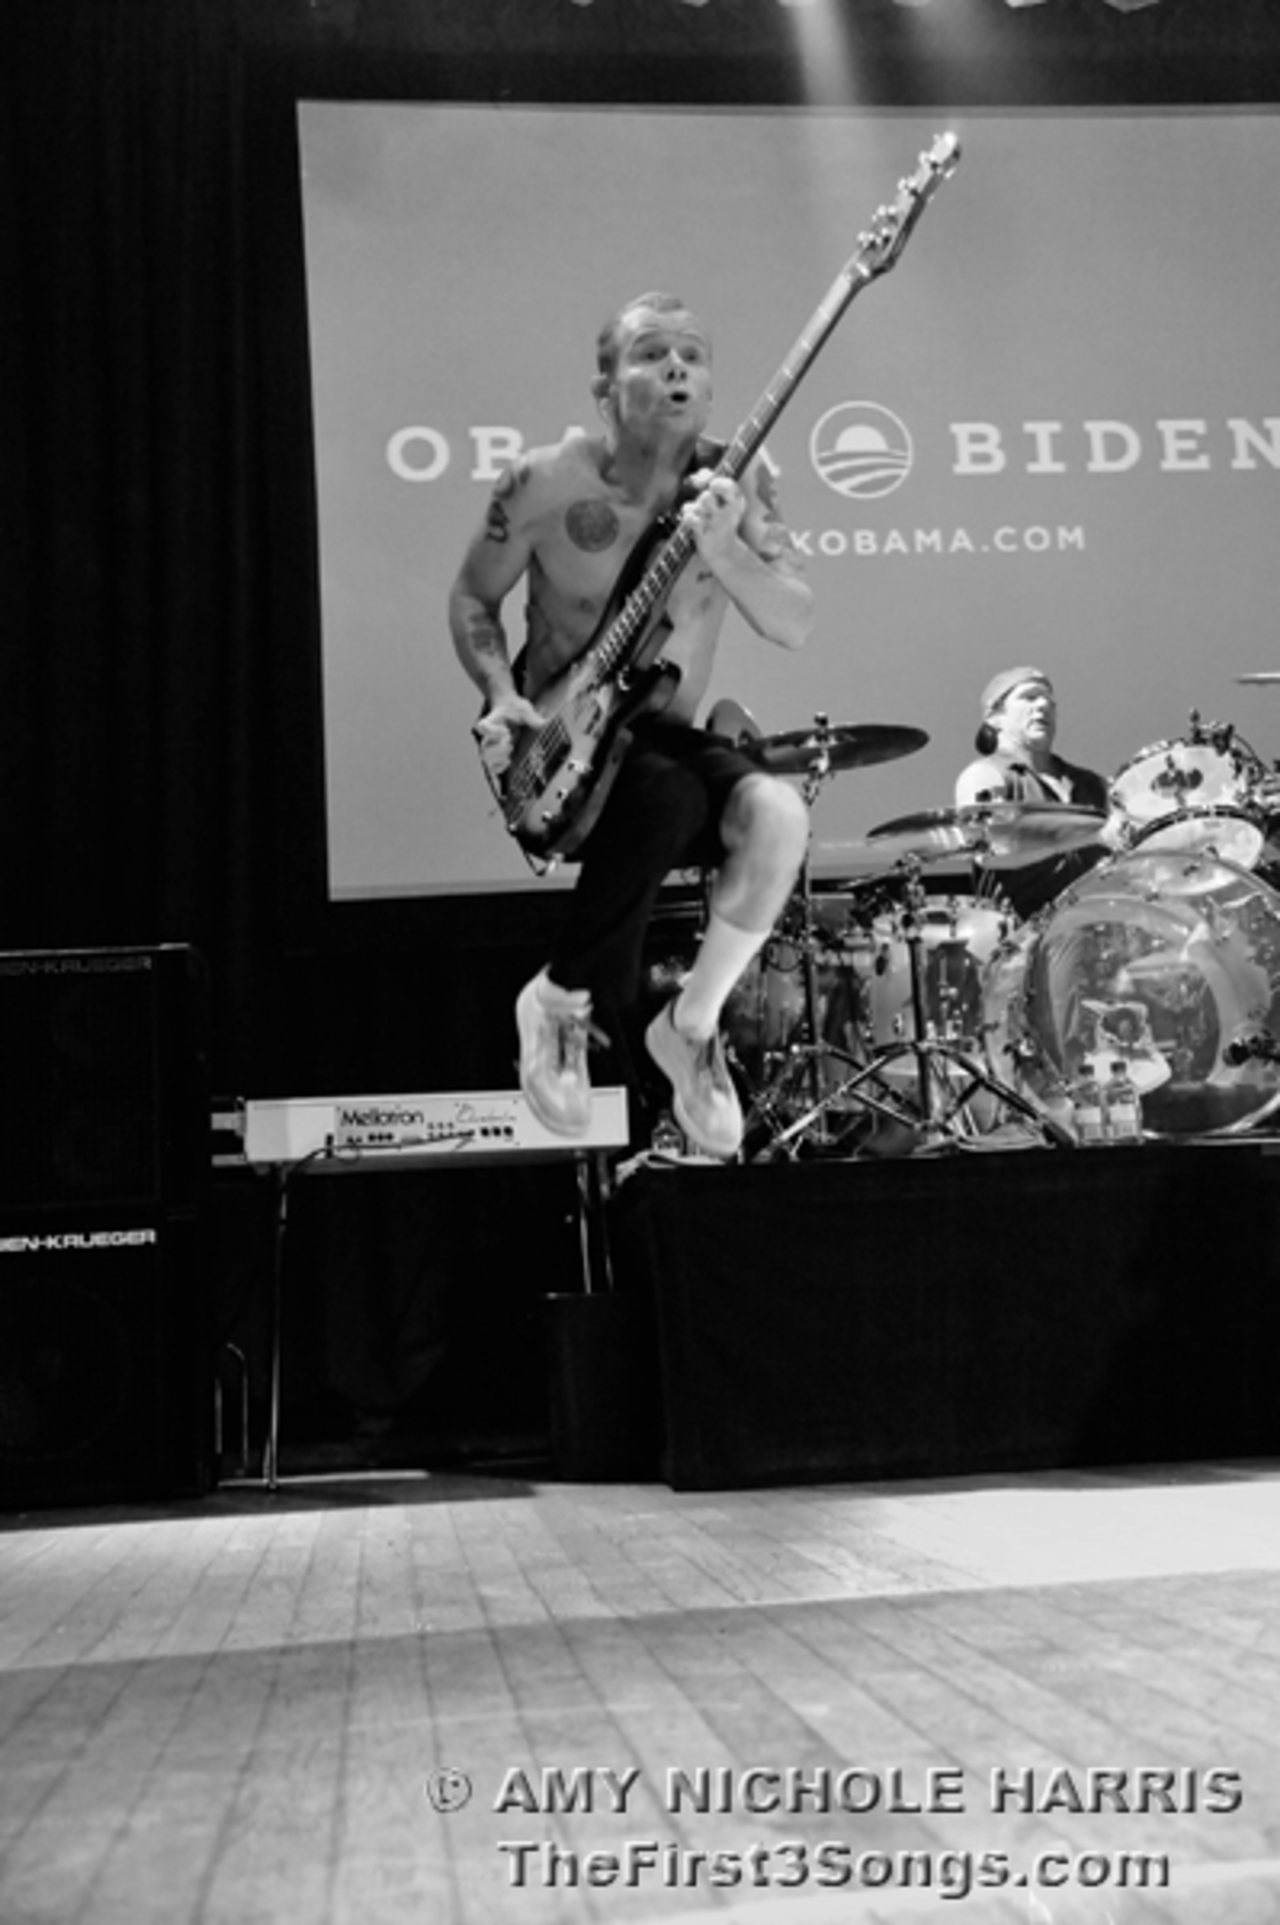 Red Hot Chili Pepper Perform for Obama Supporters